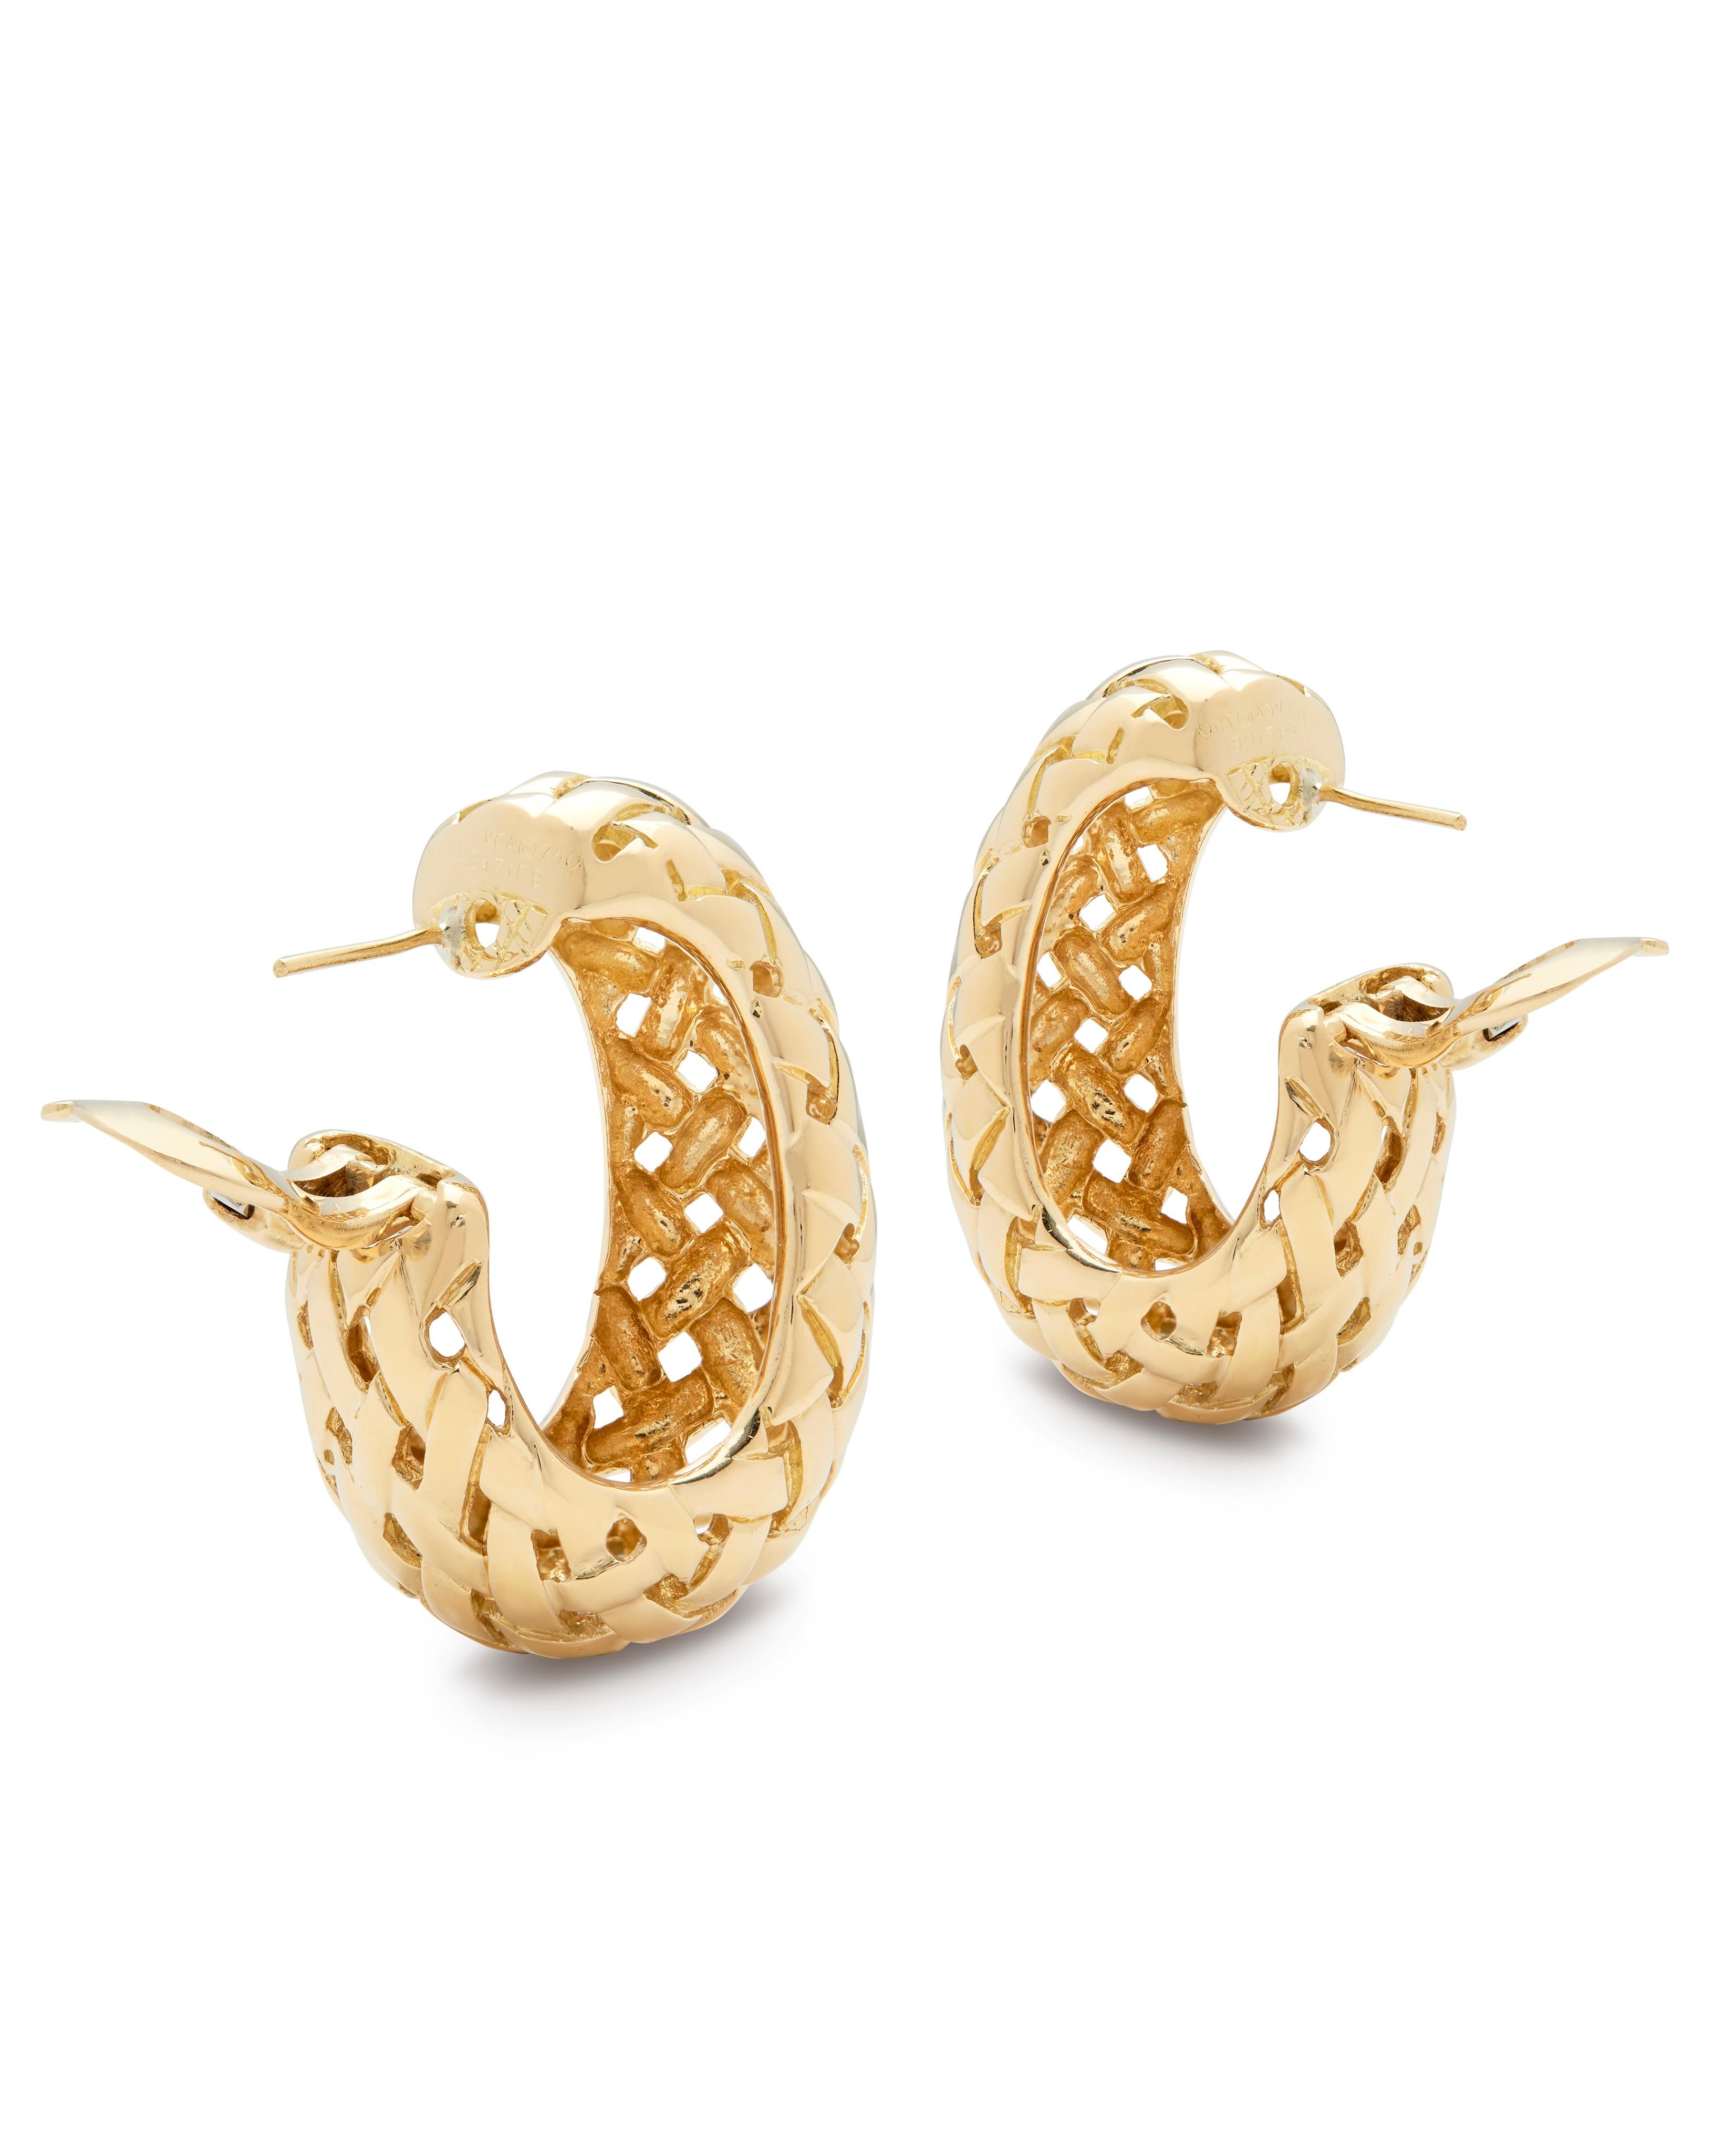 Very rare and stylish Van Cleef & Arpel’s Earrings circa 1980-90

Van Cleef & Arpels is one of the leading French High jewellery Maison, founded in 1896, VCA is arguably one of the most prestigious High jewellery house. 

Van Cleef & Arpel’s Lattice